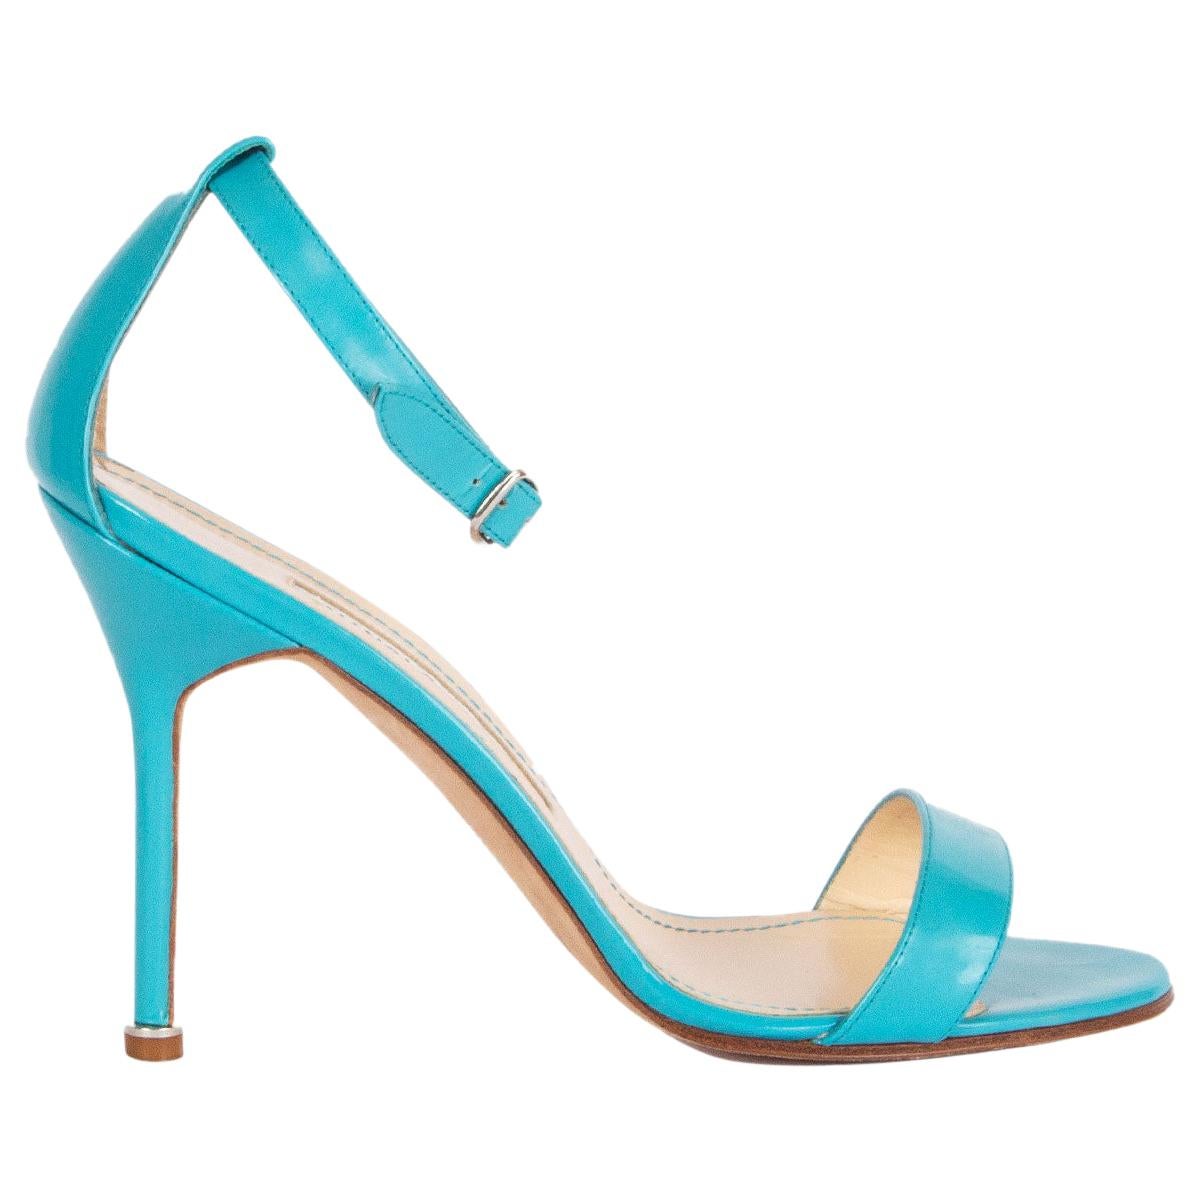 MANLO BLAHNIK turquoise patent leather CHAOS Sandals Shoes 38